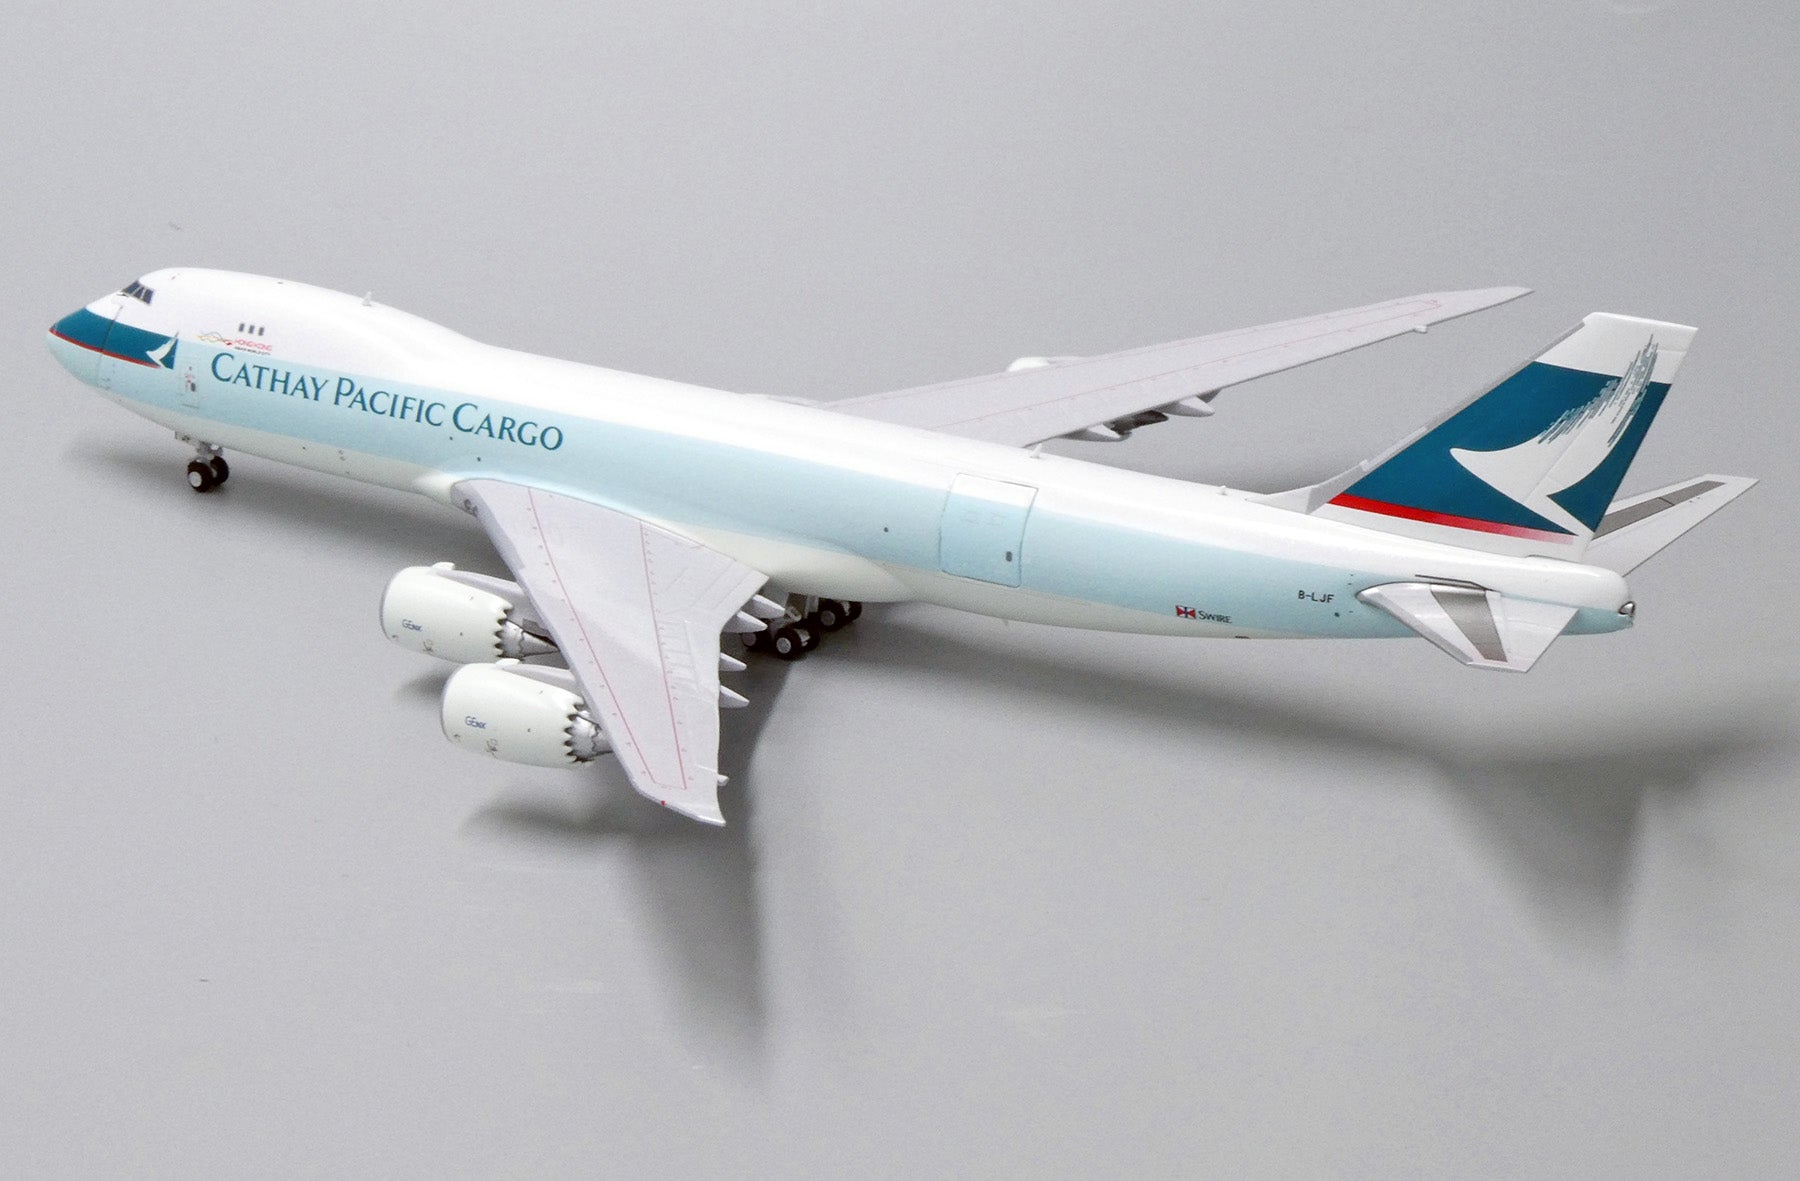 1:400 JC Wings Cathay Pacific Cargo 747-8F B-LJF 